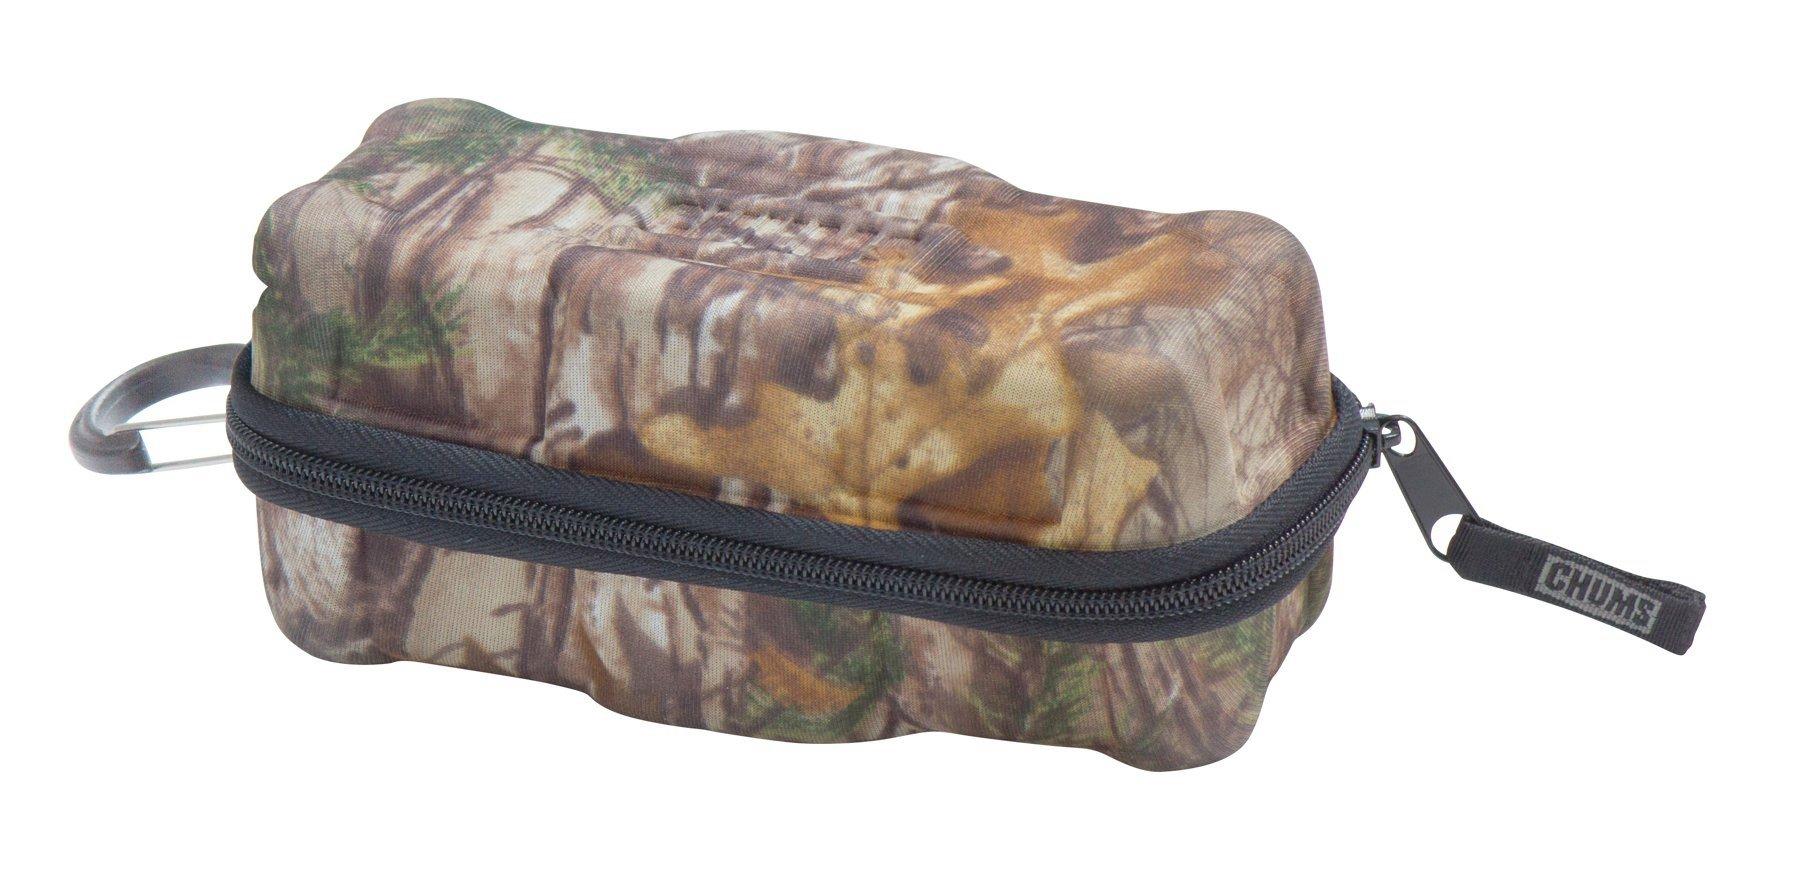 CHUMS Vault Accessory Case in Realtree Xtra